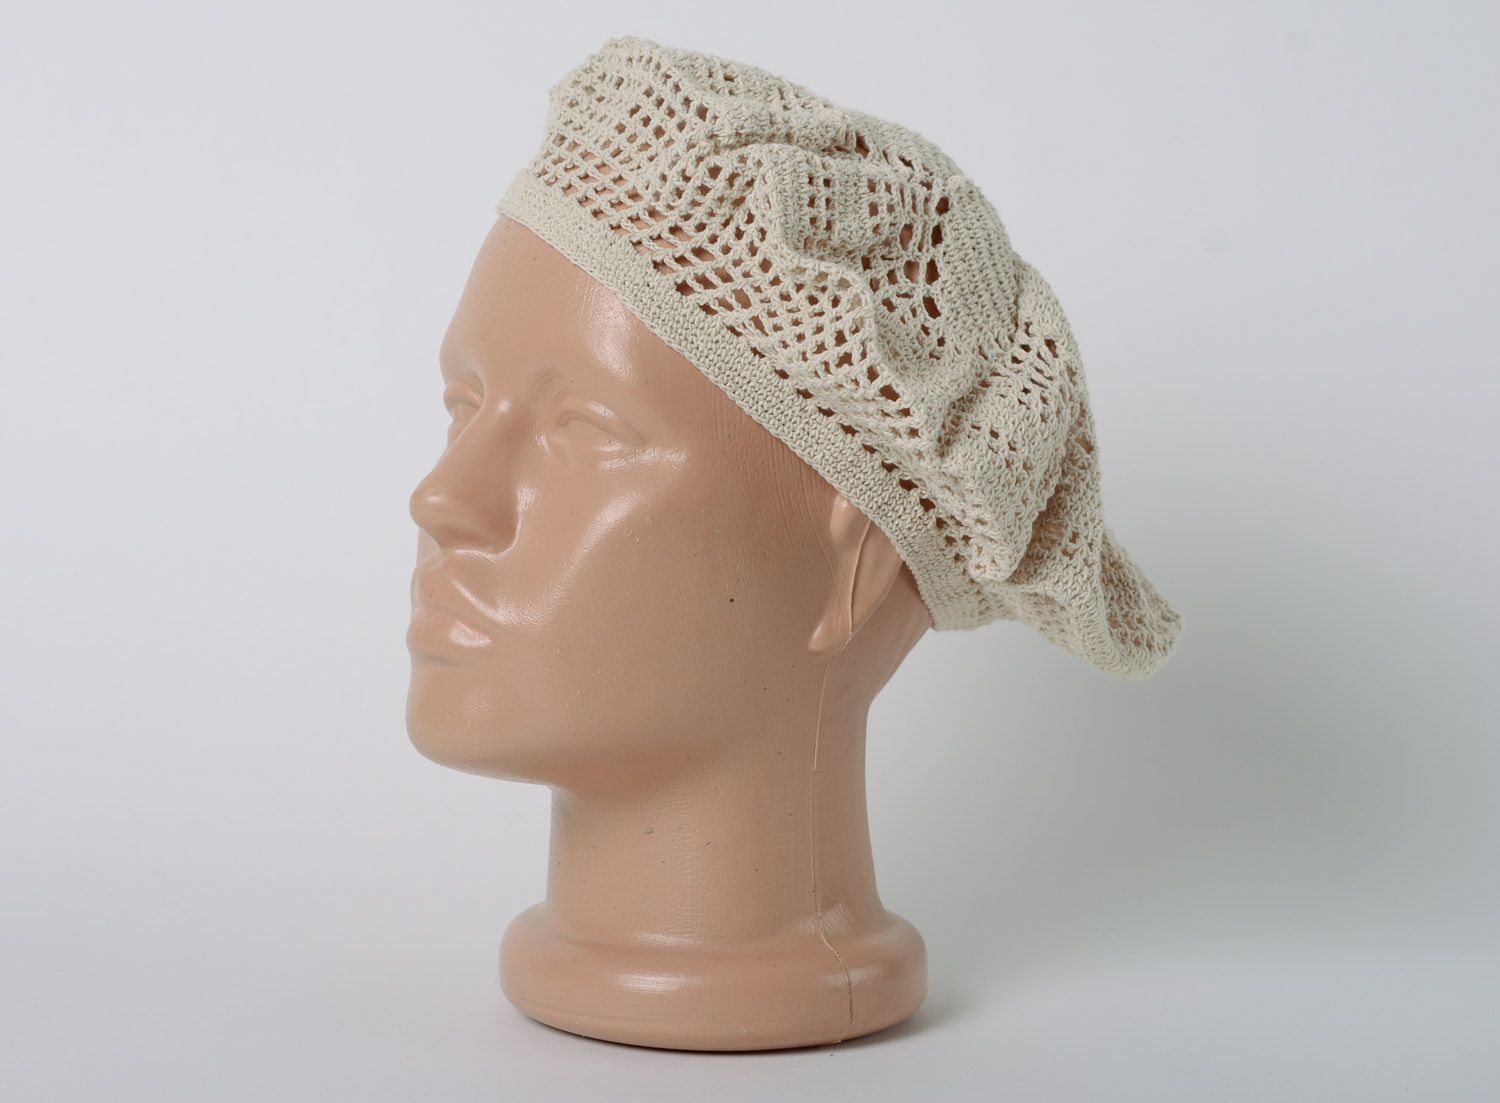 Tender lacy handmade beret hat crocheted of beige cotton threads for women photo 1